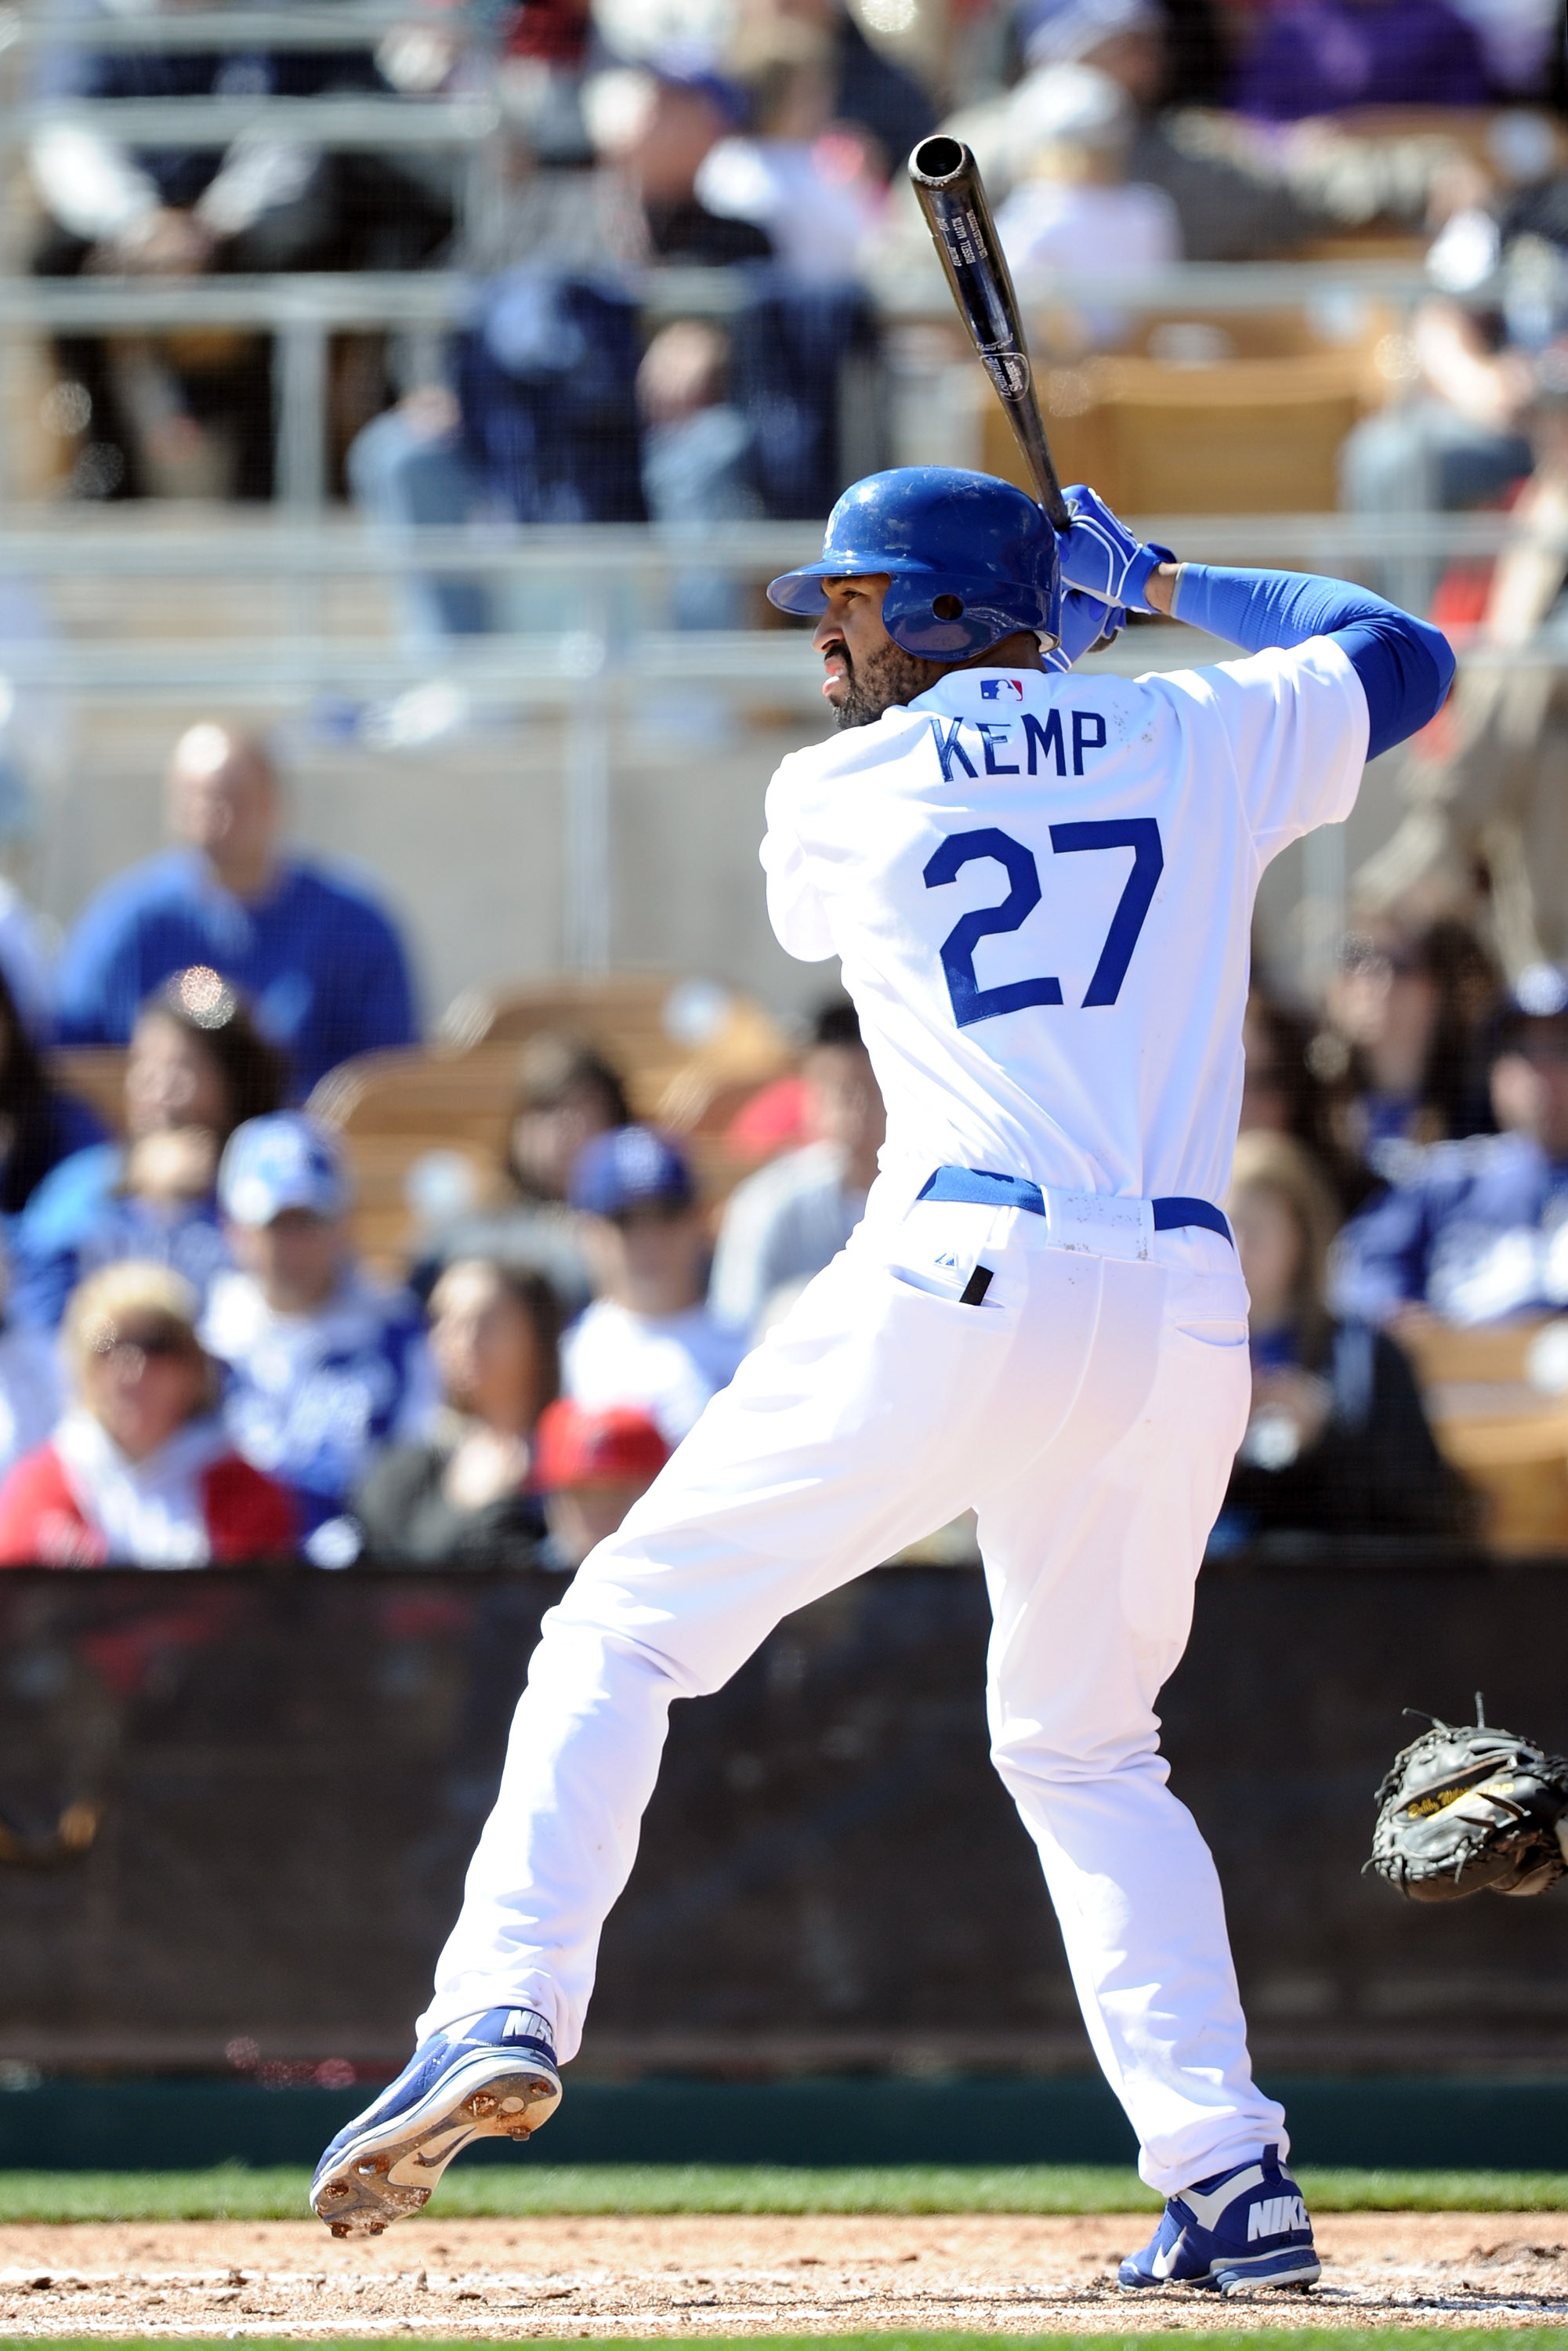 PHOENIX, AZ - FEBRUARY 27:  Matt Kemp #27 of the  Los Angeles Dodgers at bat during spring training at Camelback Ranch on February 27, 2011 in Phoenix, Arizona.  (Photo by Harry How/Getty Images)